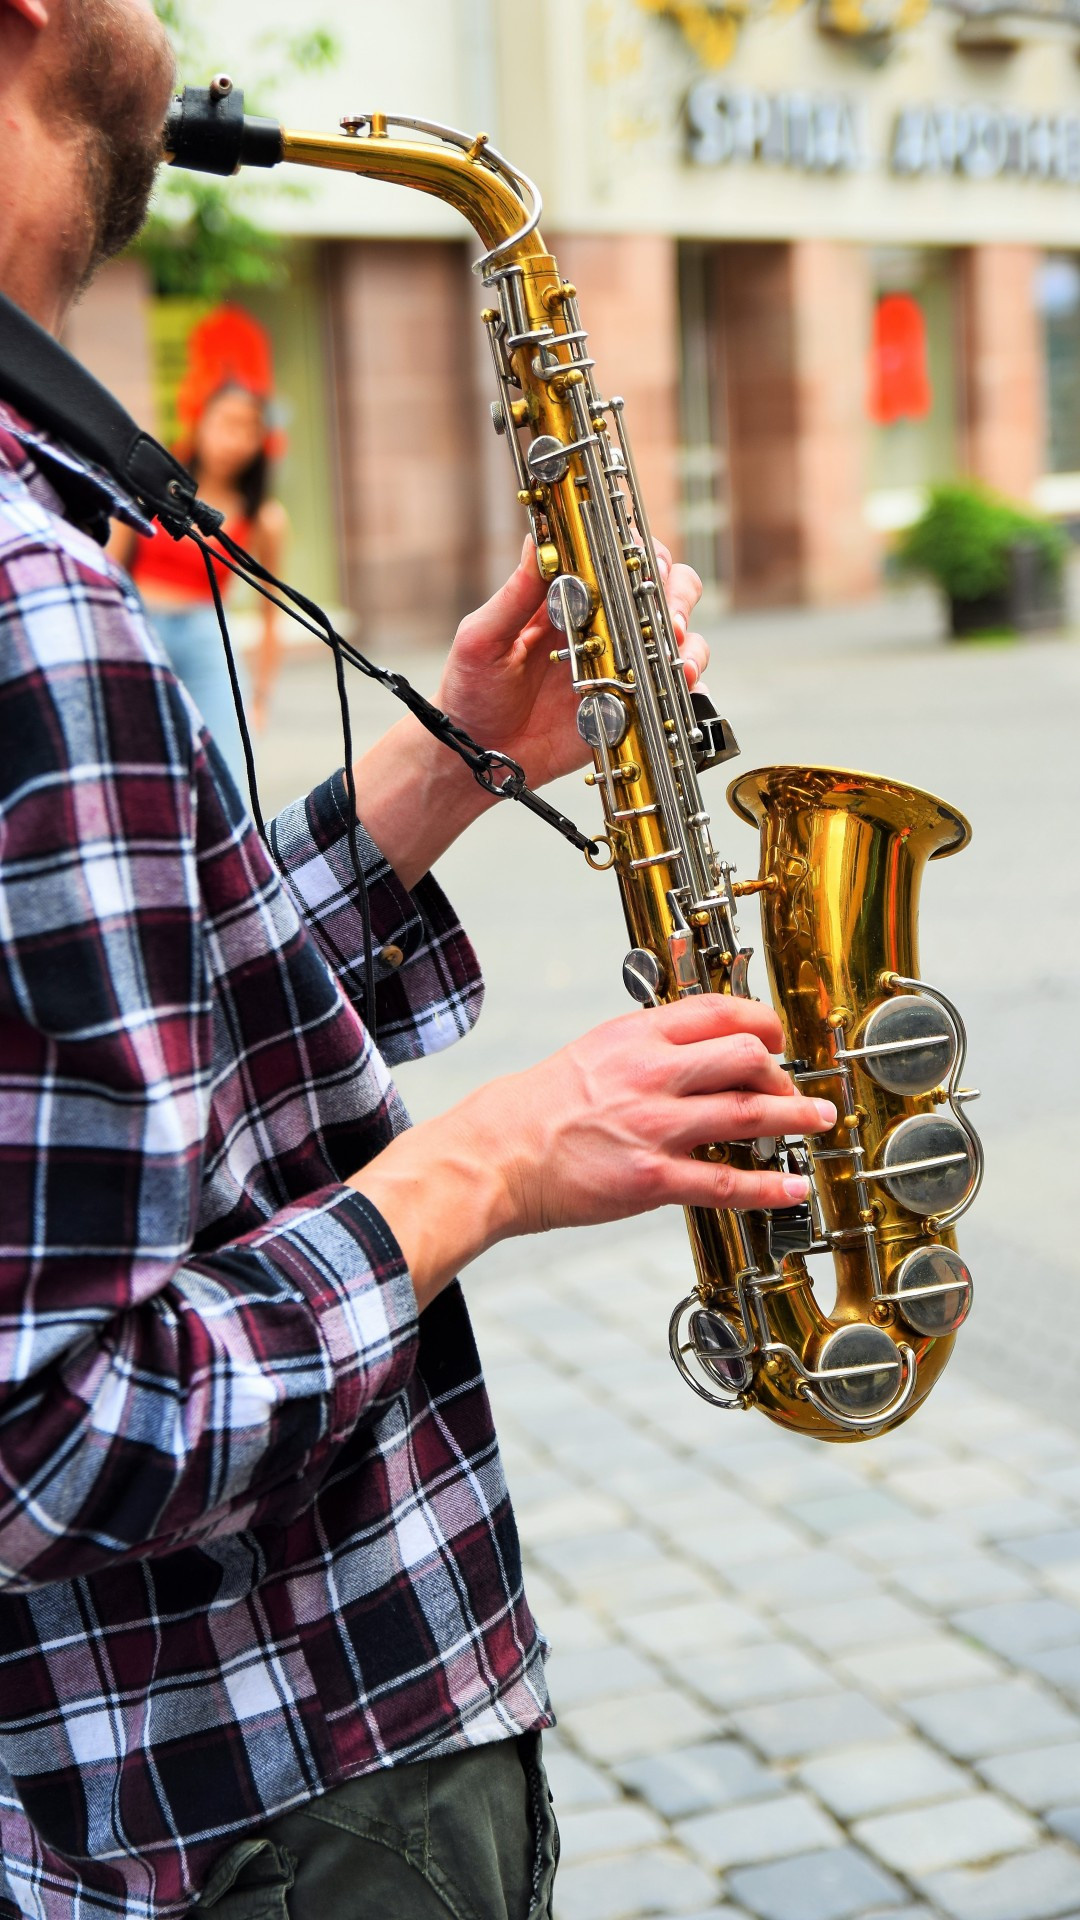 Saxophone: Street musician, A musical wind instrument consisting of a brass tube and a mouthpiece with one reed. 1080x1920 Full HD Wallpaper.